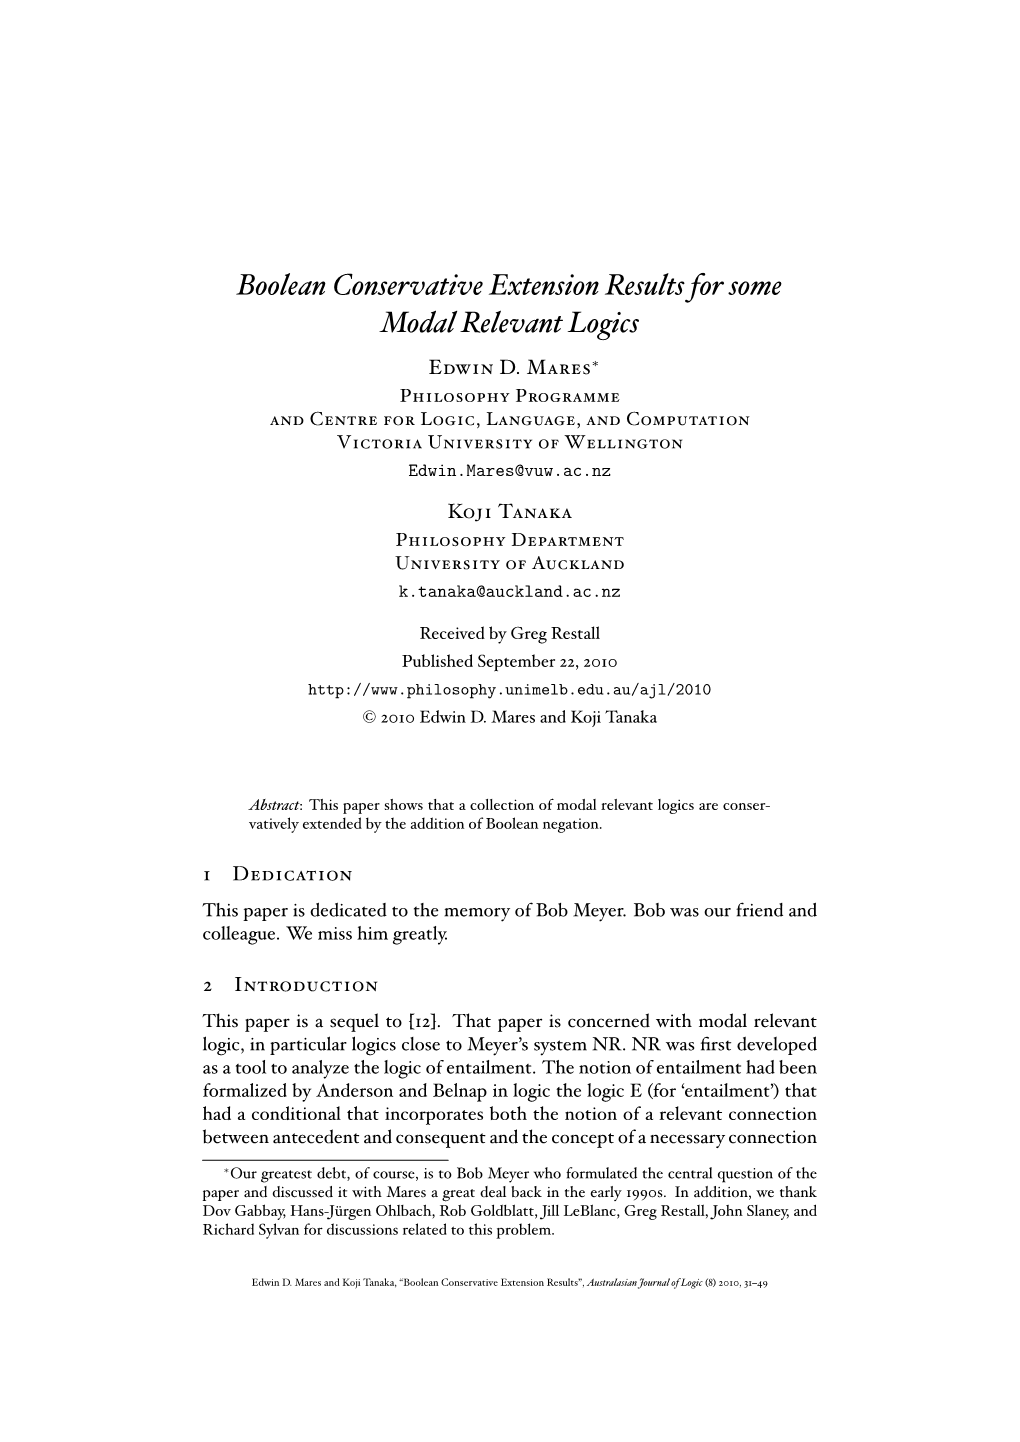 Boolean Conservative Extension Results for Some Modal Relevant Logics E D